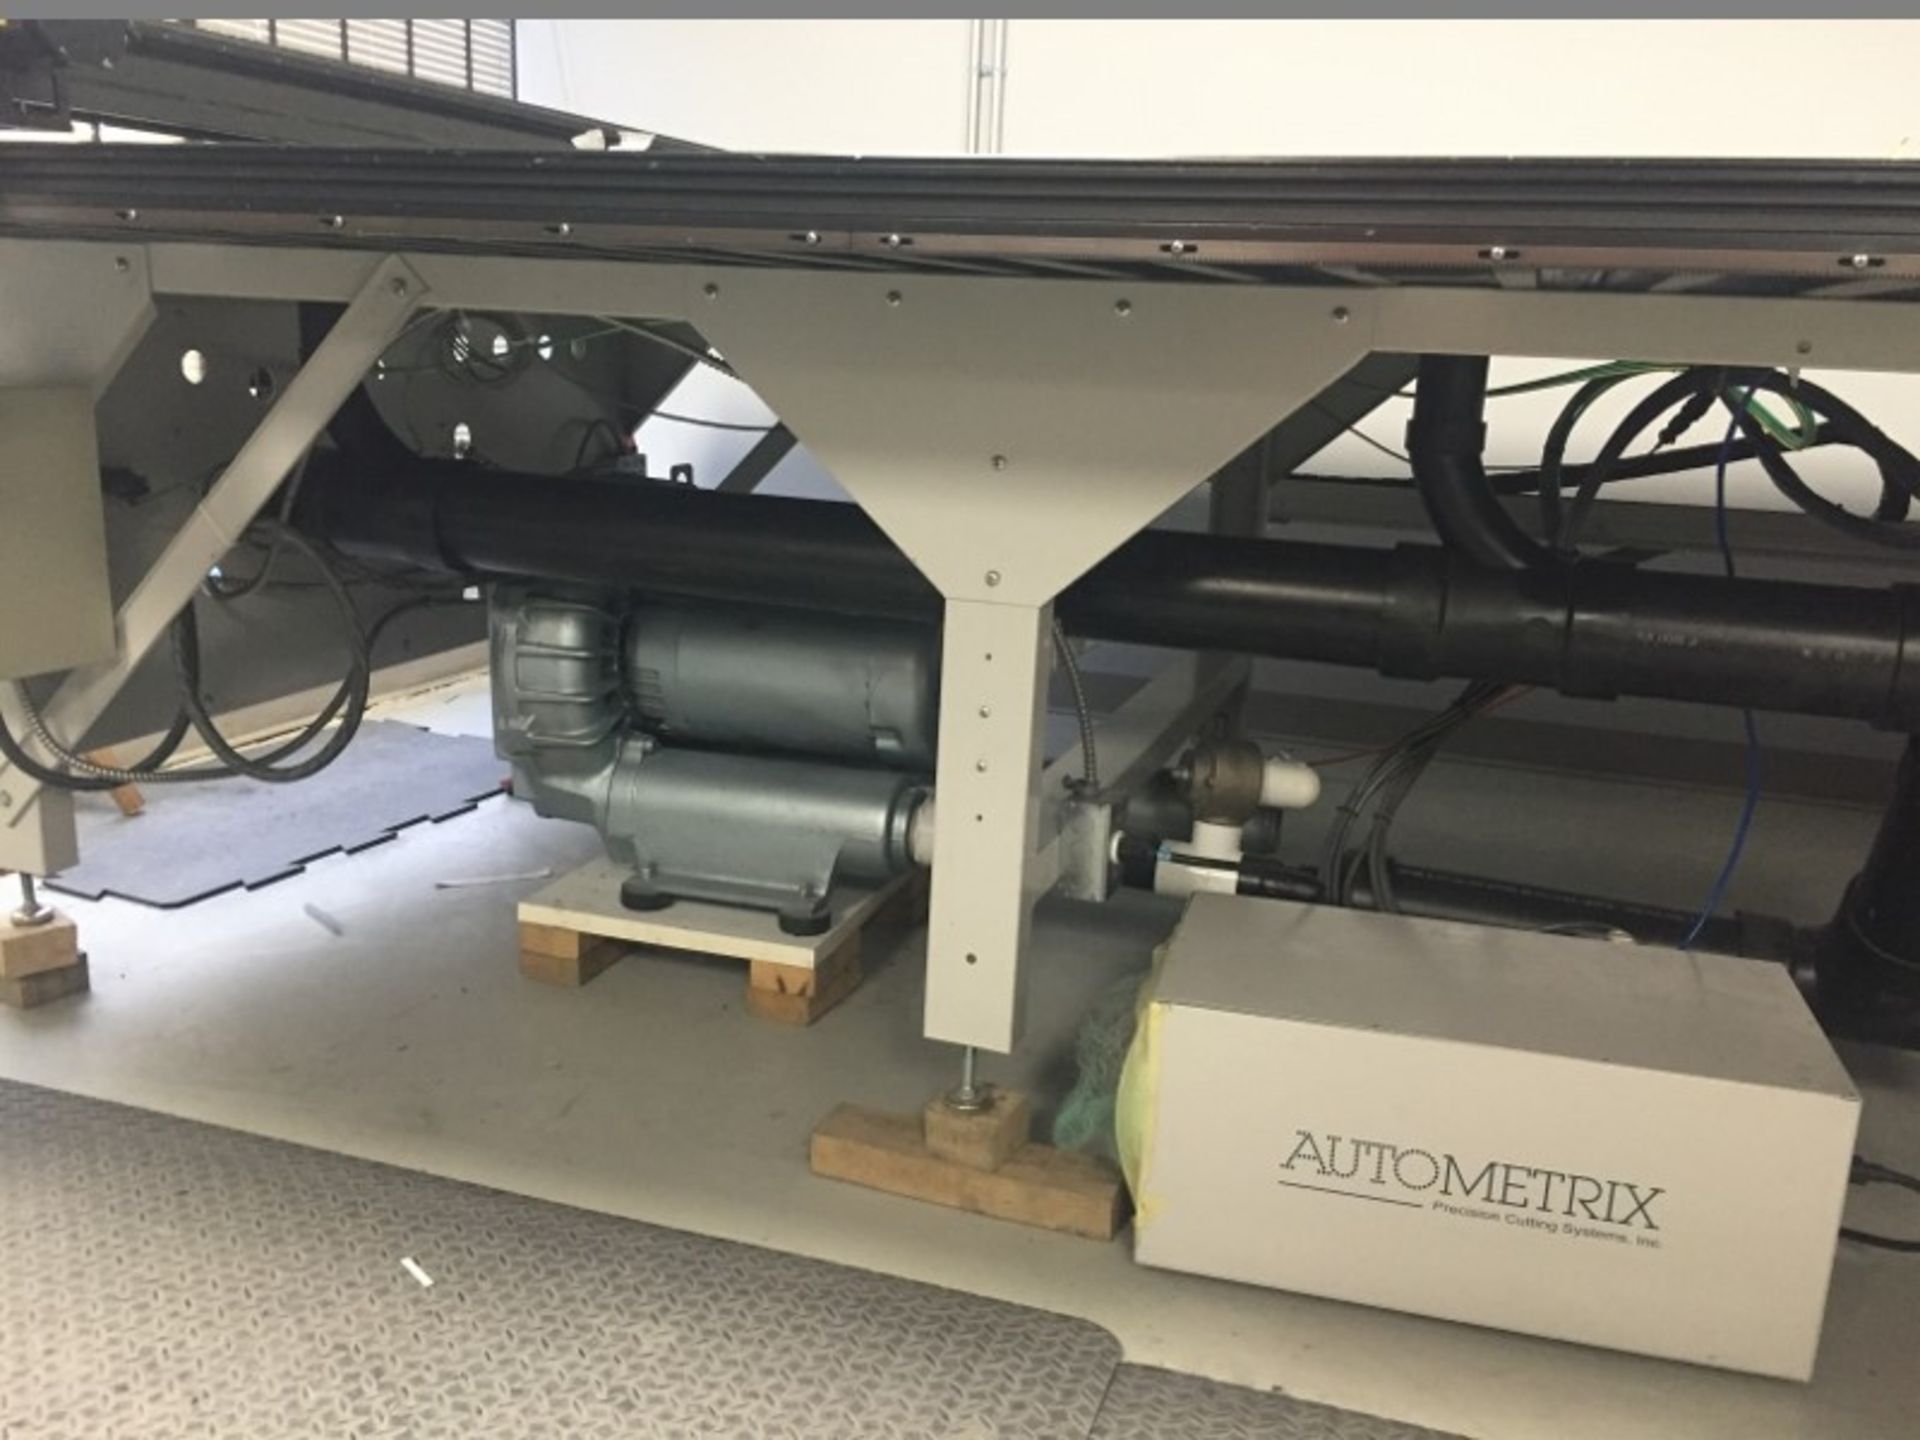 Autometrix precise cutting table w/suction 19"x145" - Image 4 of 6